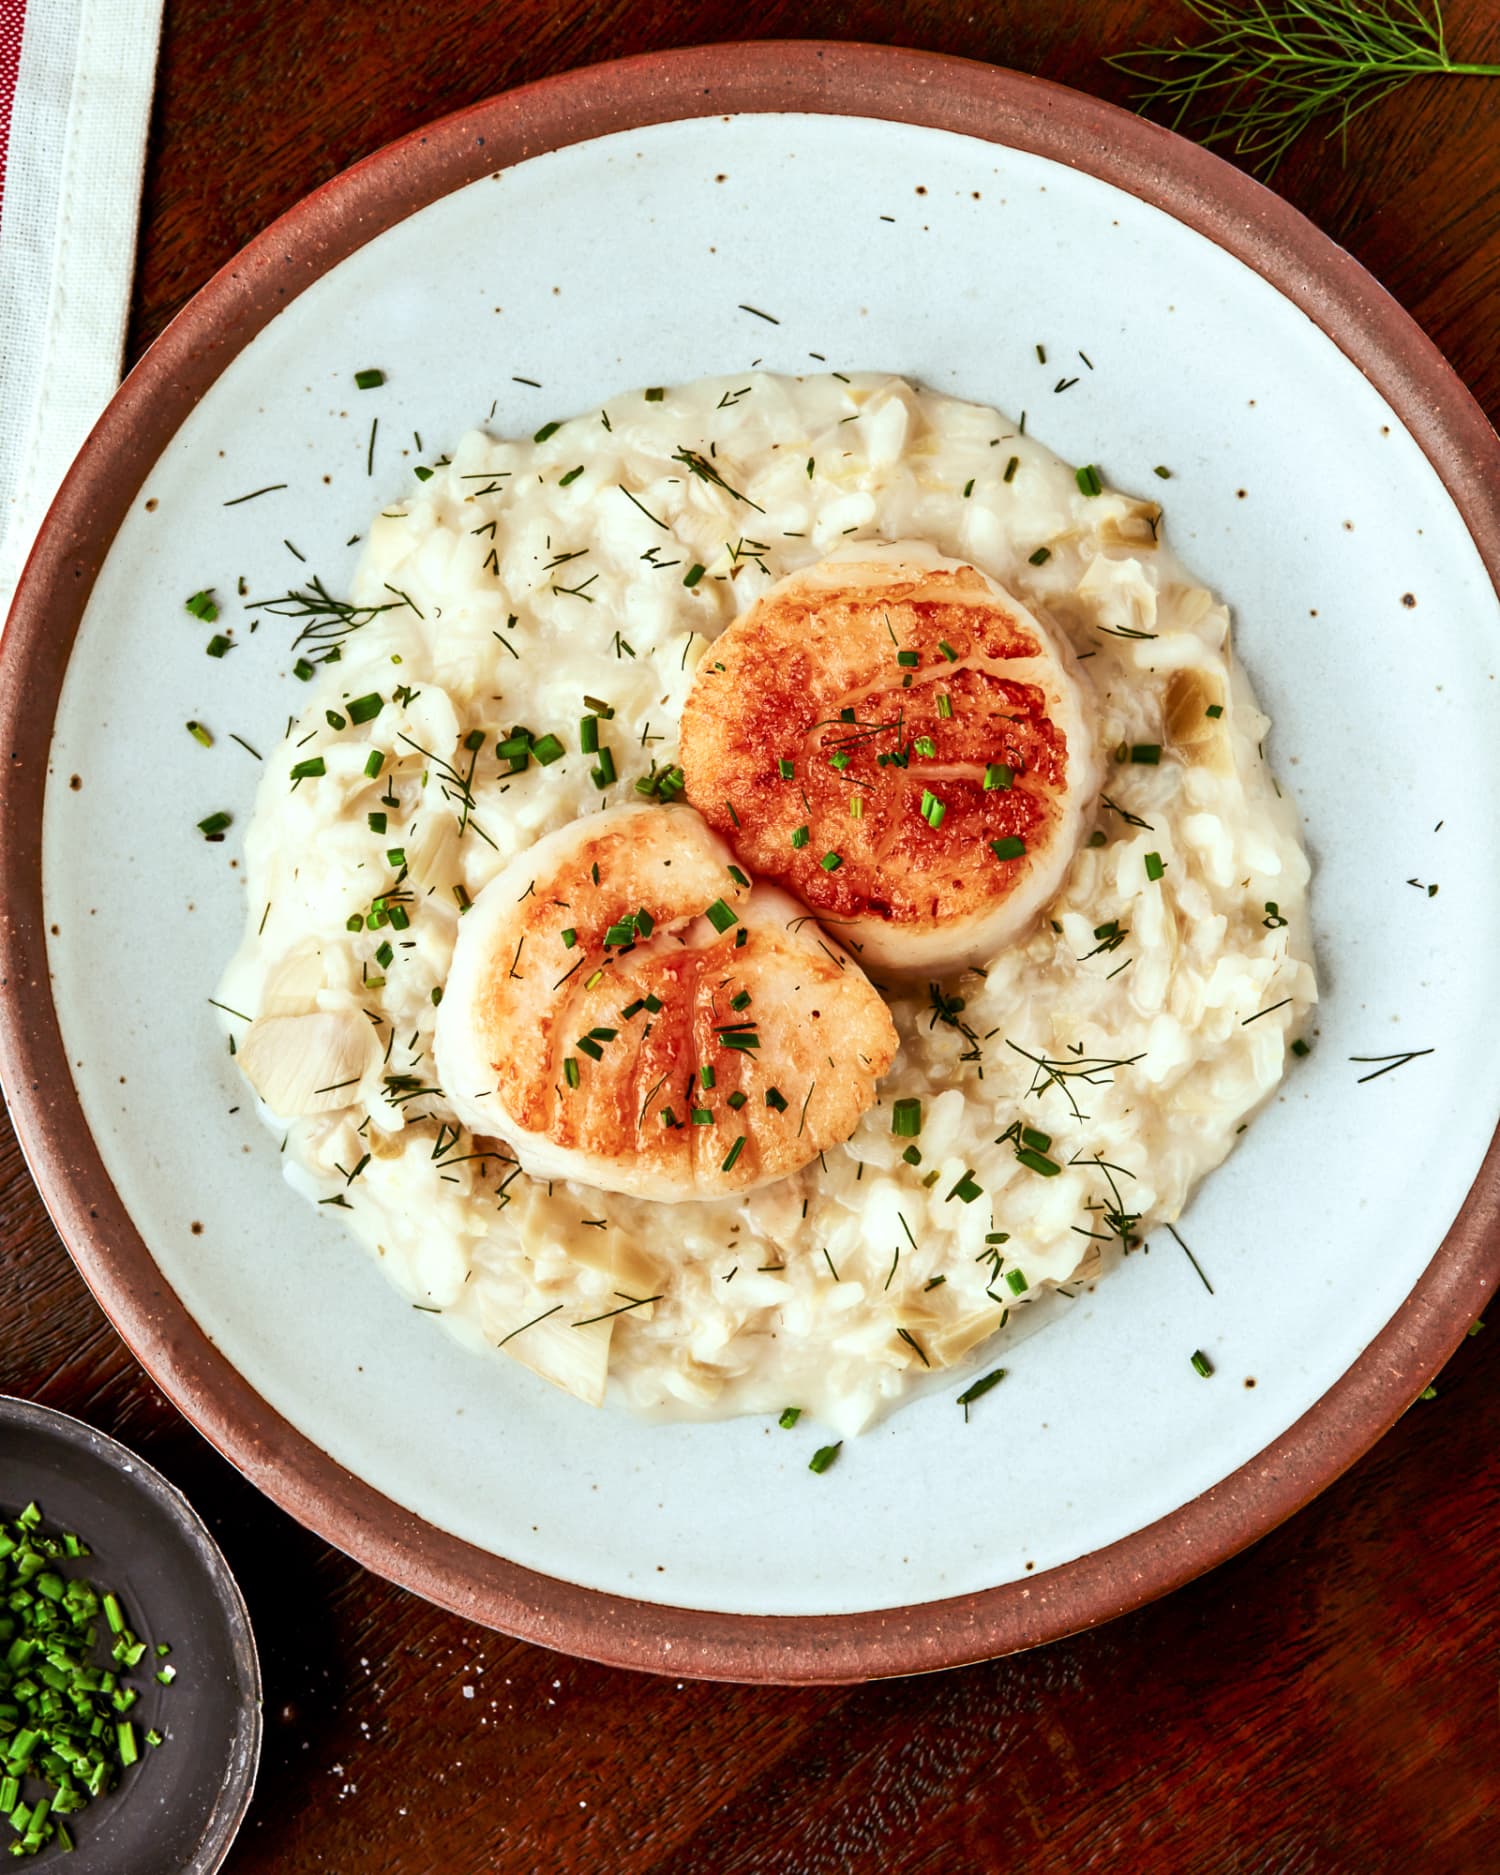 Creamy Artichoke Risotto with Seared Scallops Is the Ultimate Date-Night Dinner